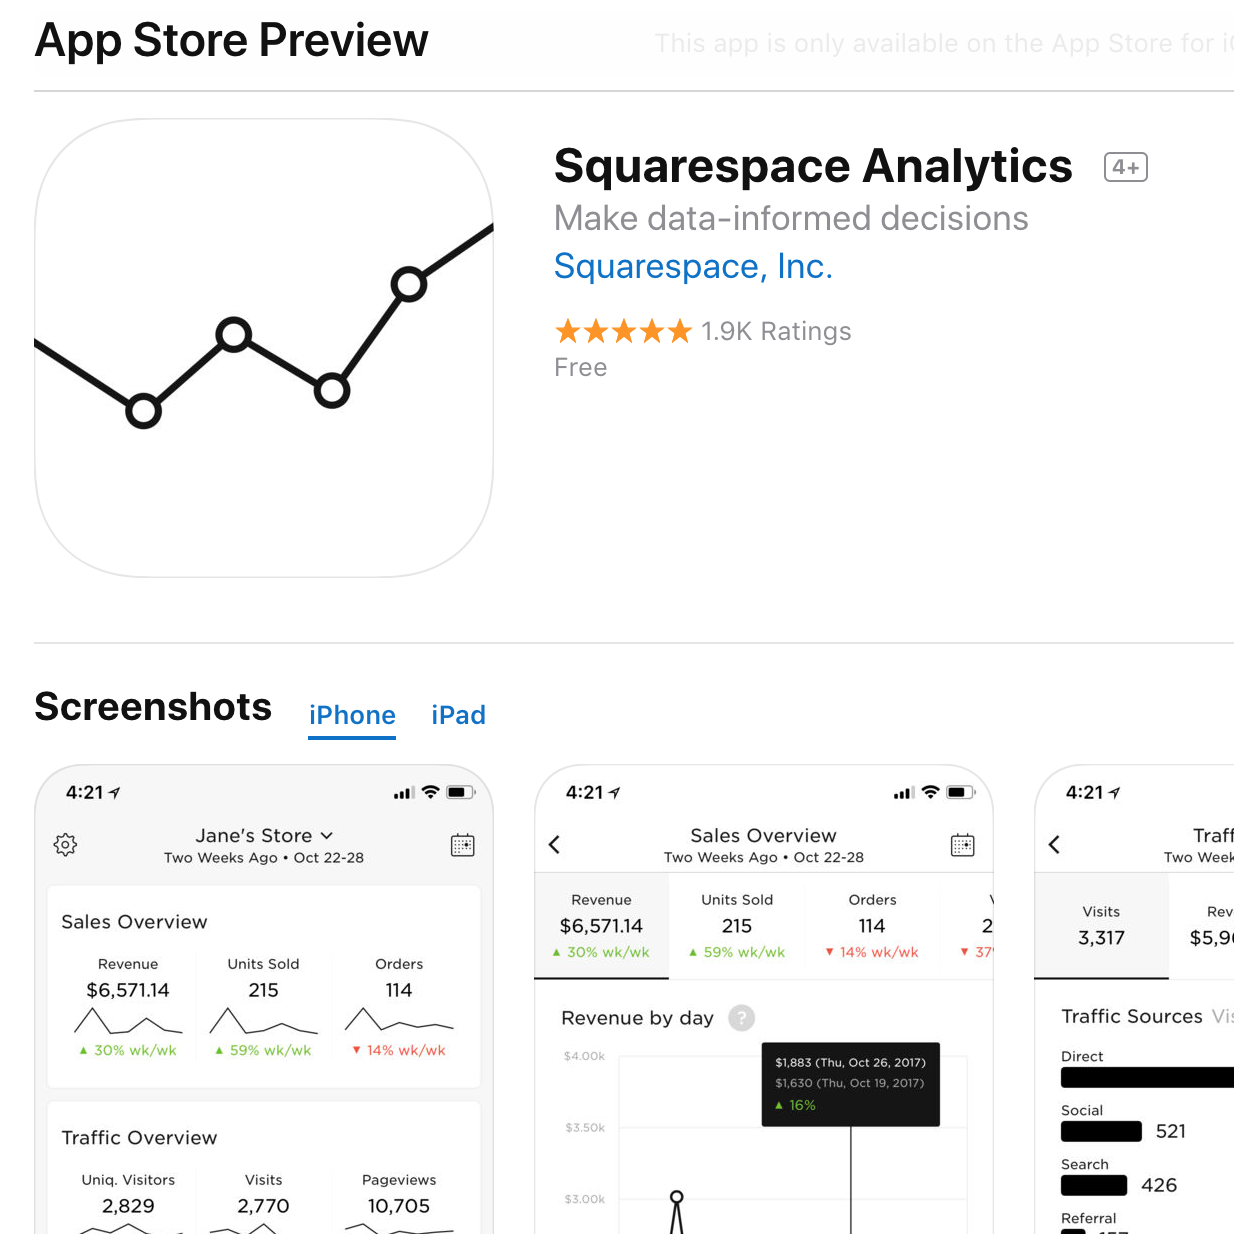 Squarespace Analytics iOS, Android apps - 4.9 star avg rating